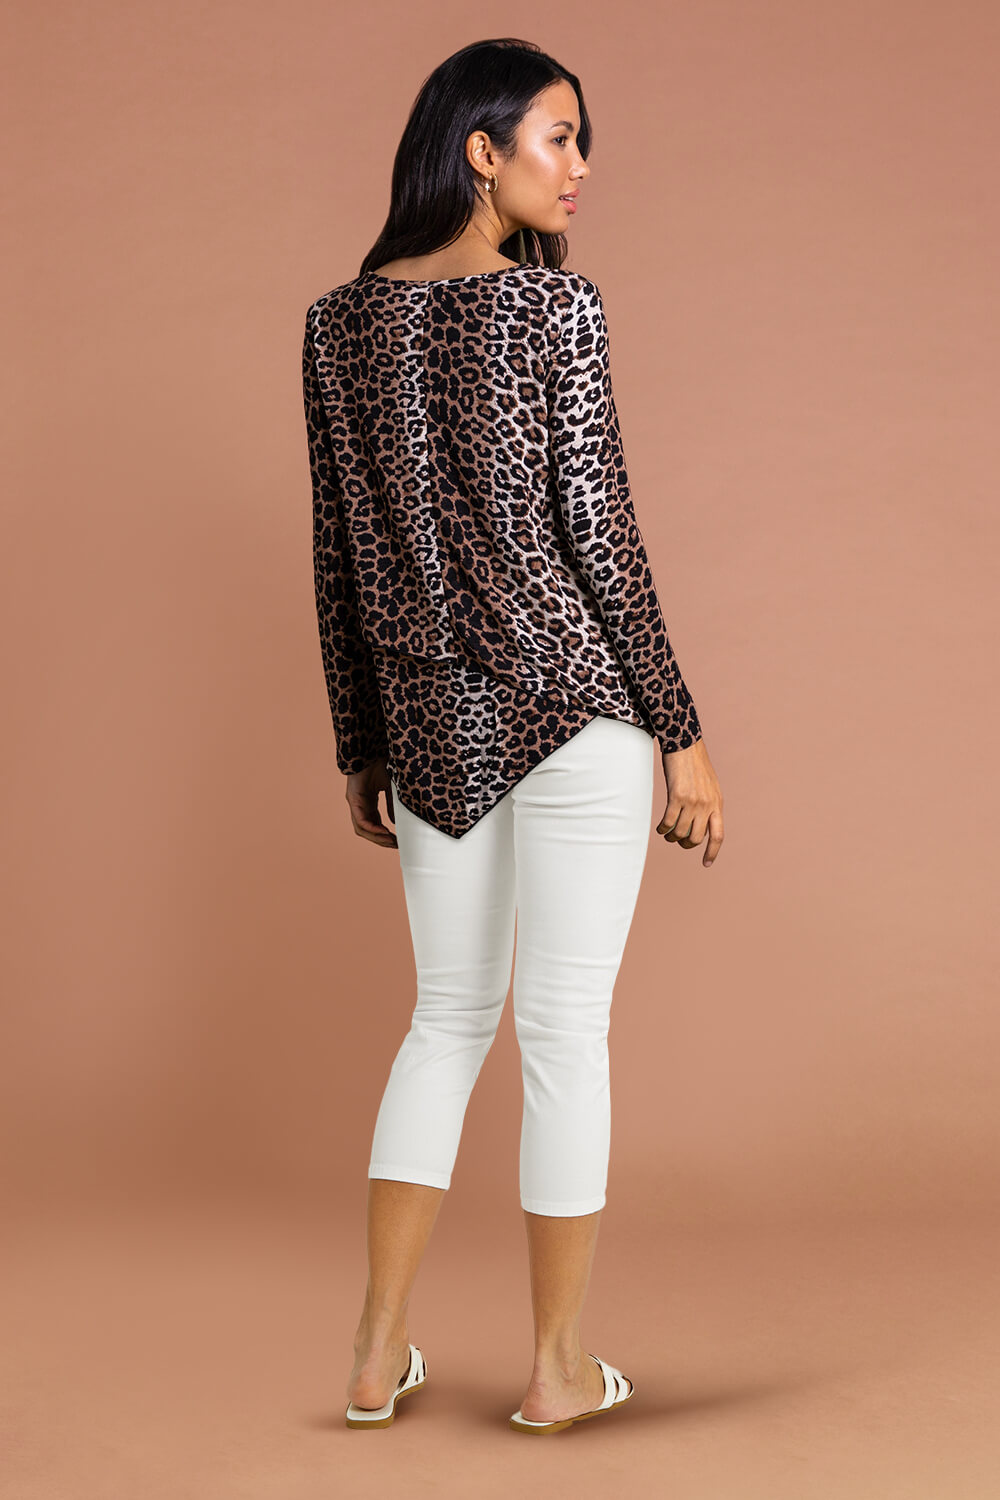 Brown Animal Leopard Print Layered Asymmetric Top , Image 3 of 4